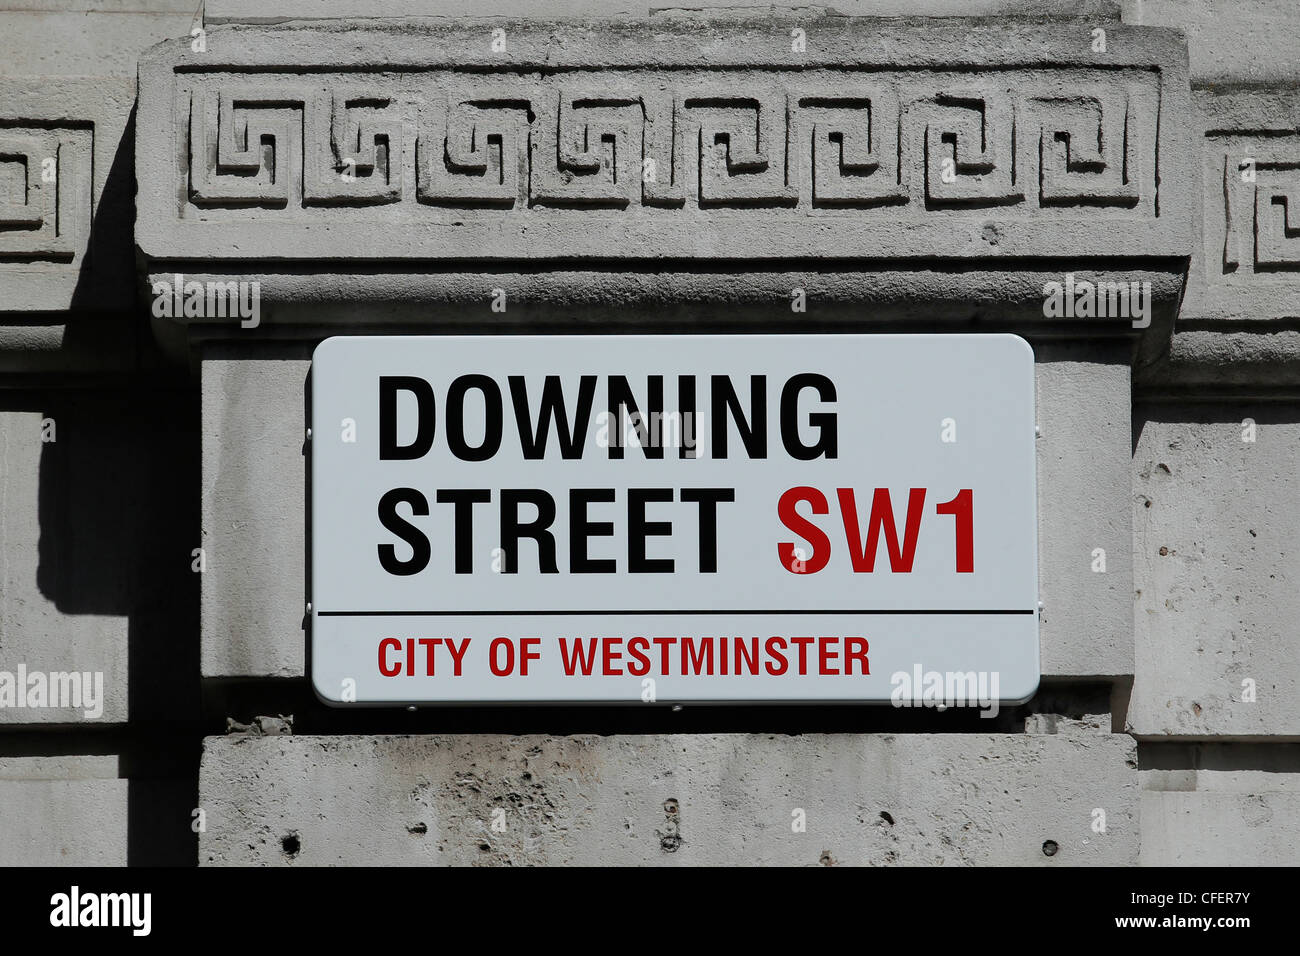 Cartello stradale di Downing Street in CAP SW1, City of Westminster, Londra Foto Stock